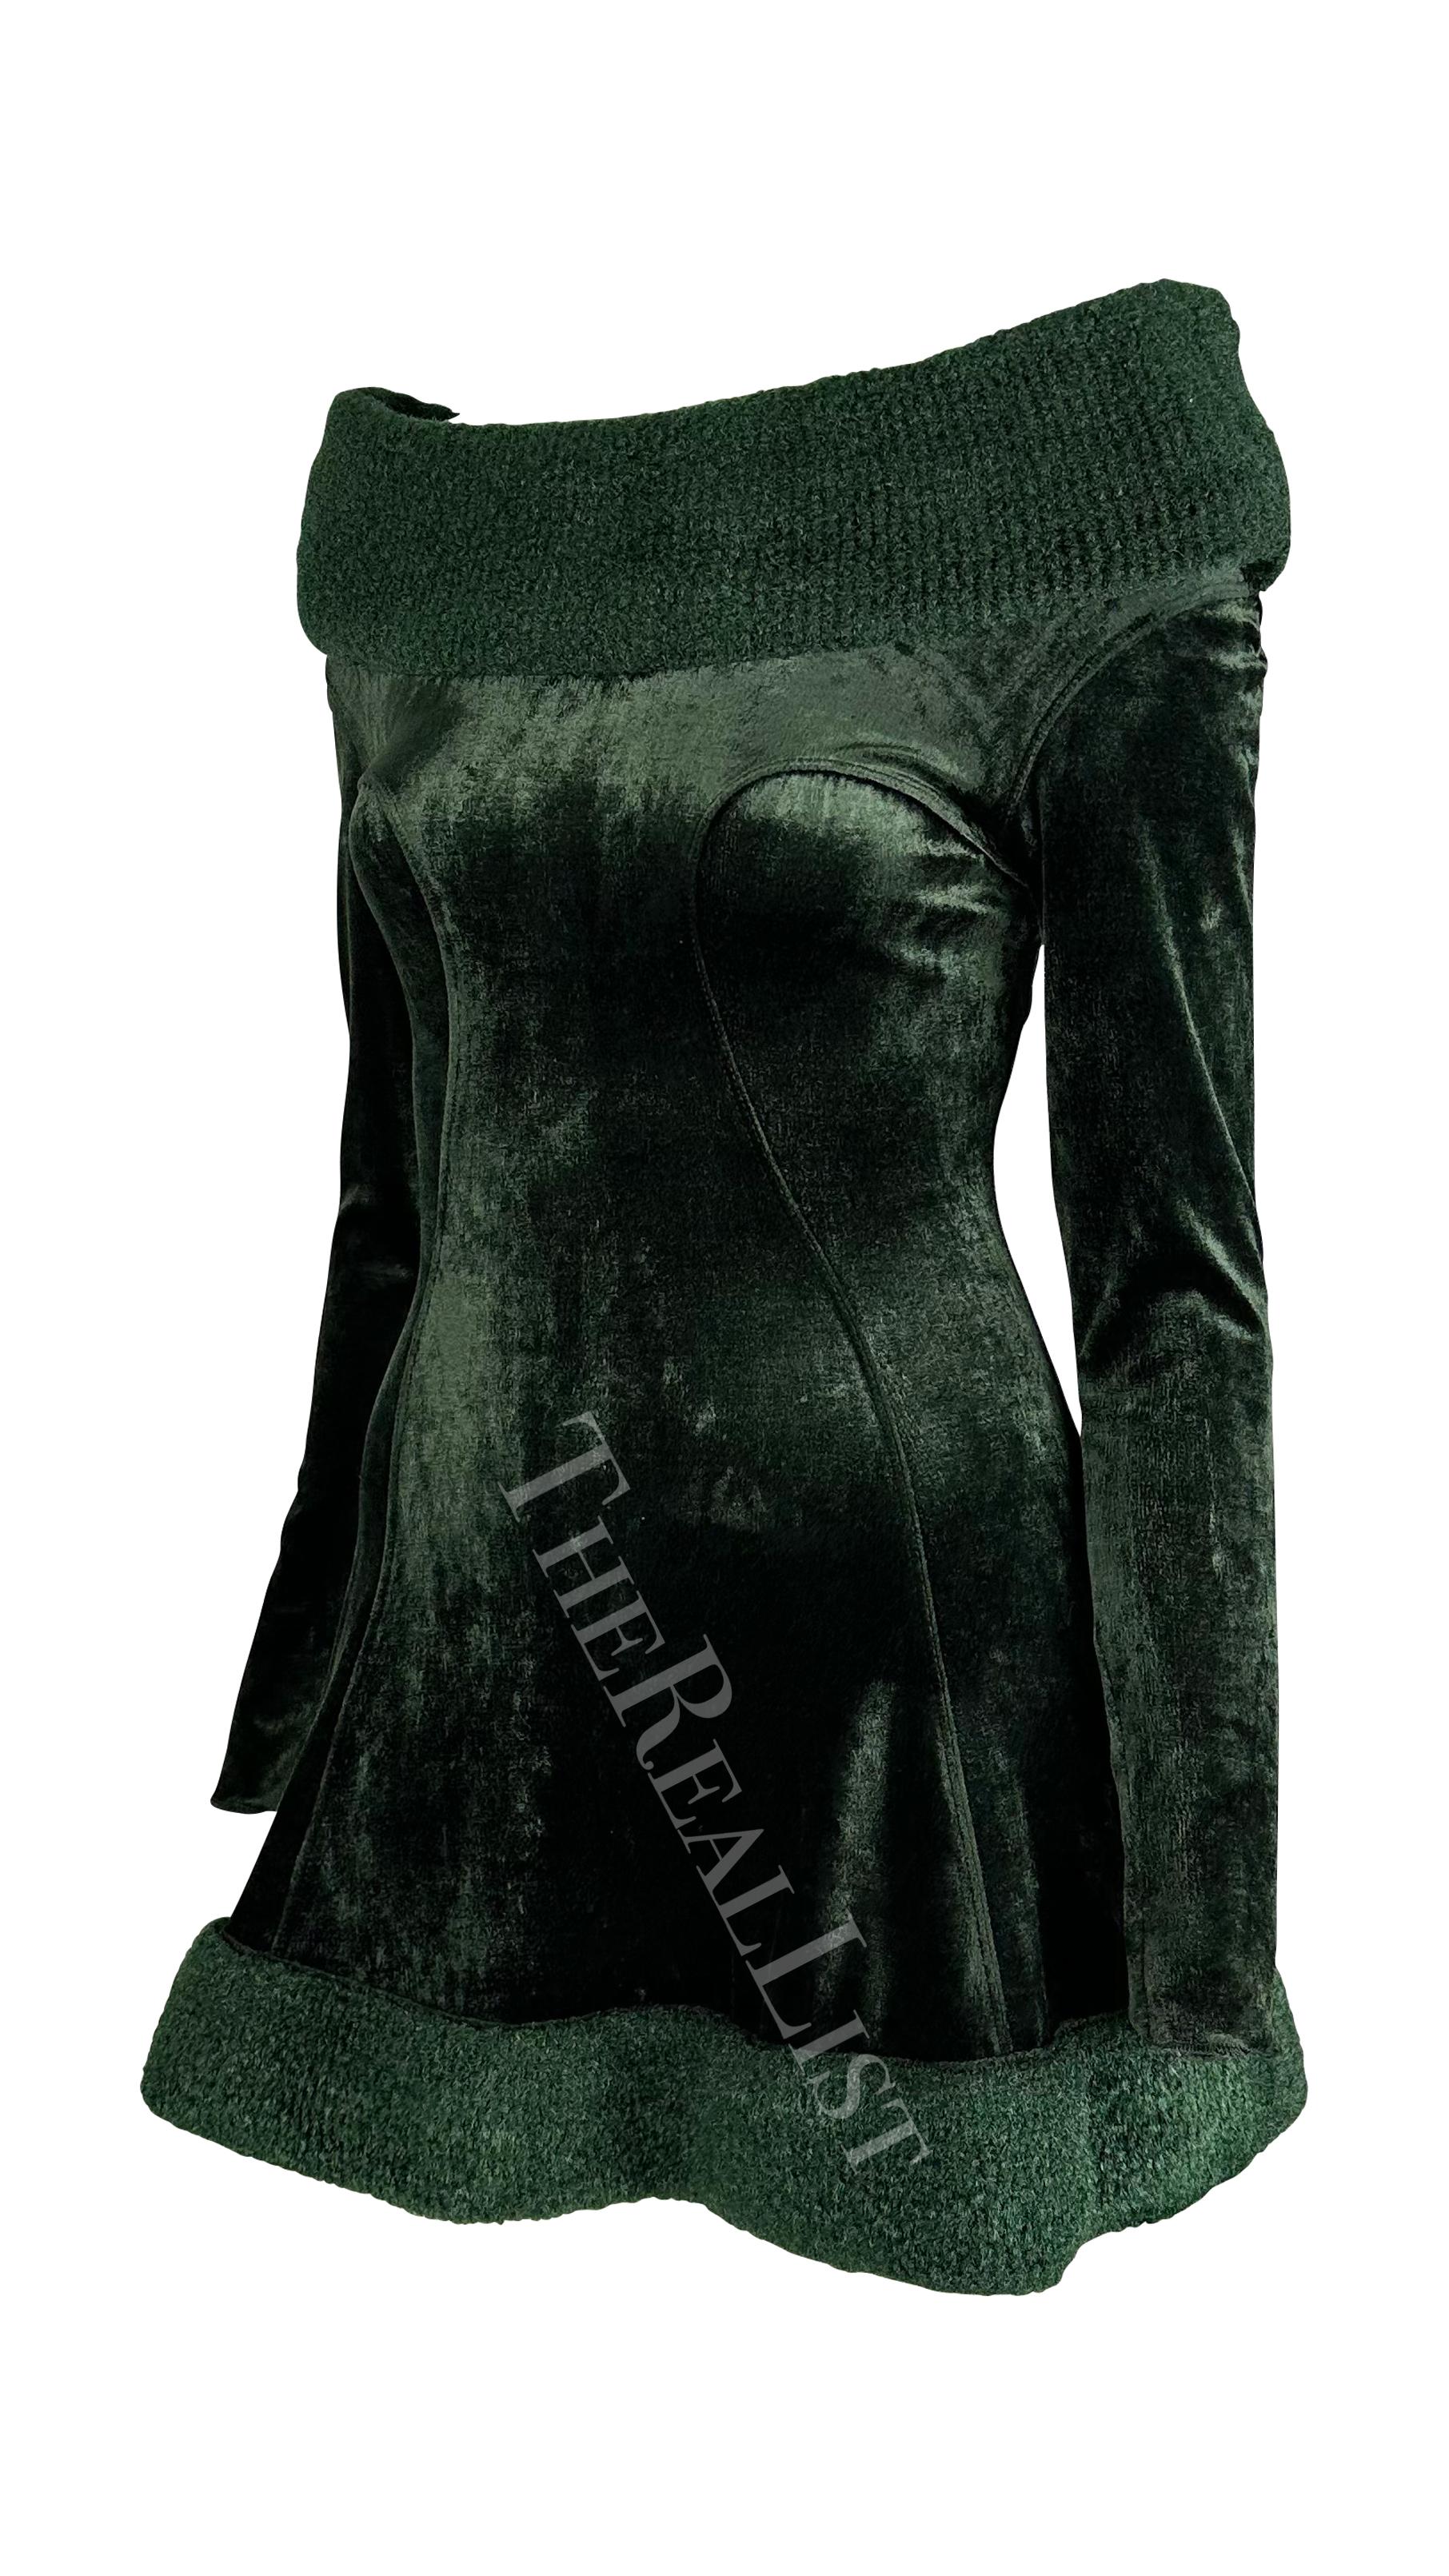 Presenting a fabulous dark green Alaia mini dress. From the Fall/Winter 1991 collection, this dress is constructed of rich deep green velvet. The form-fitting mini dress features long sleeves, a flare-cut skirt, and an off-the-shoulder neckline.